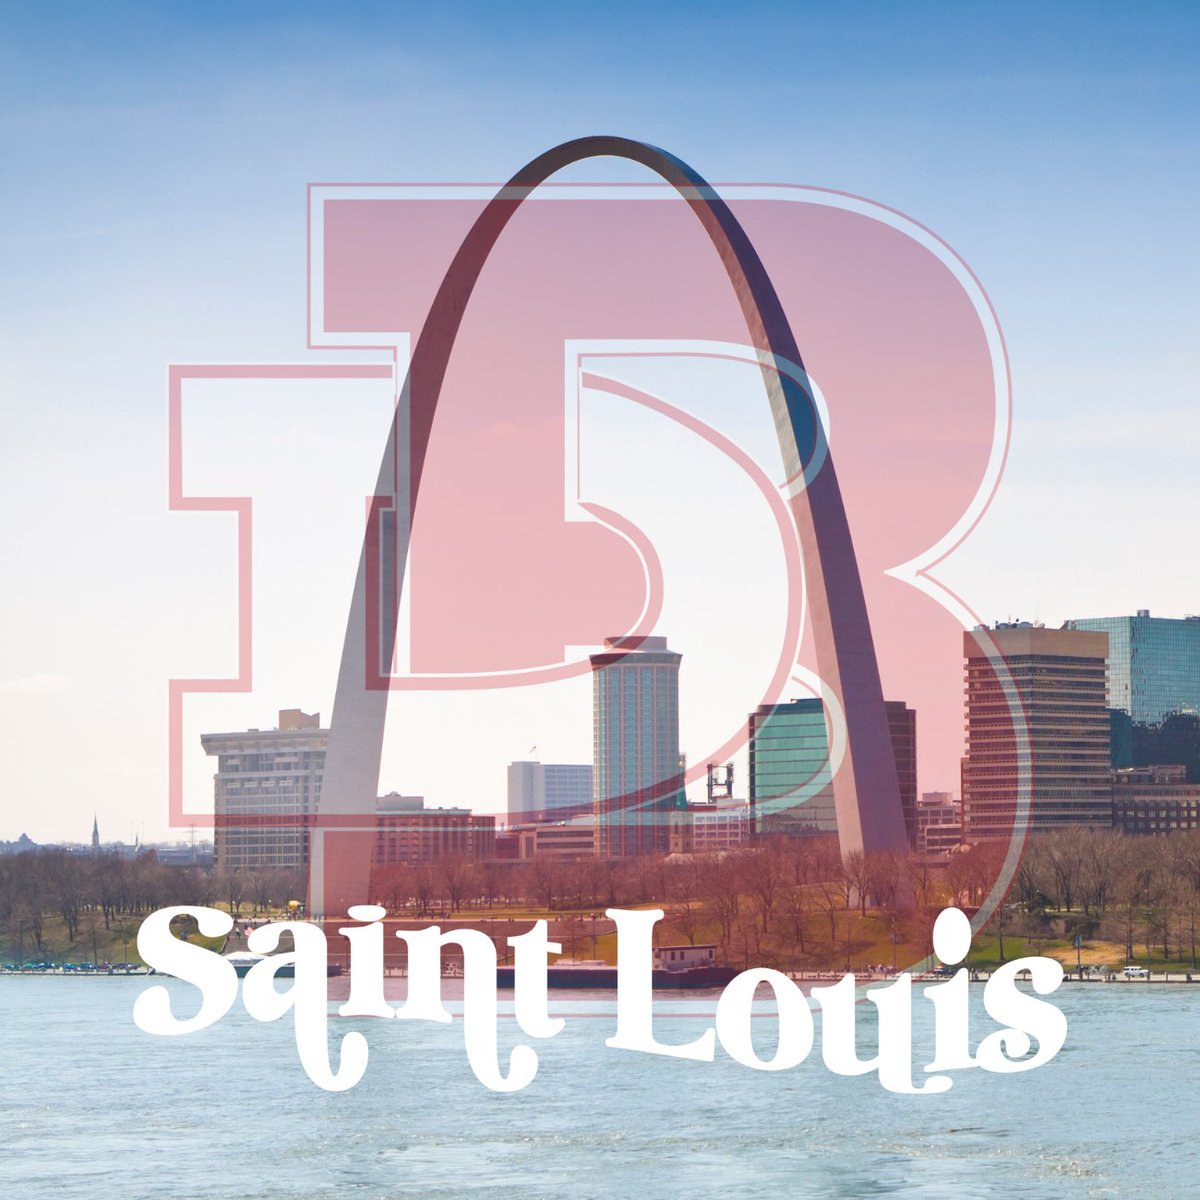 Happy 3.14 day, St. Louis! 
#FromTheLou #STL #314